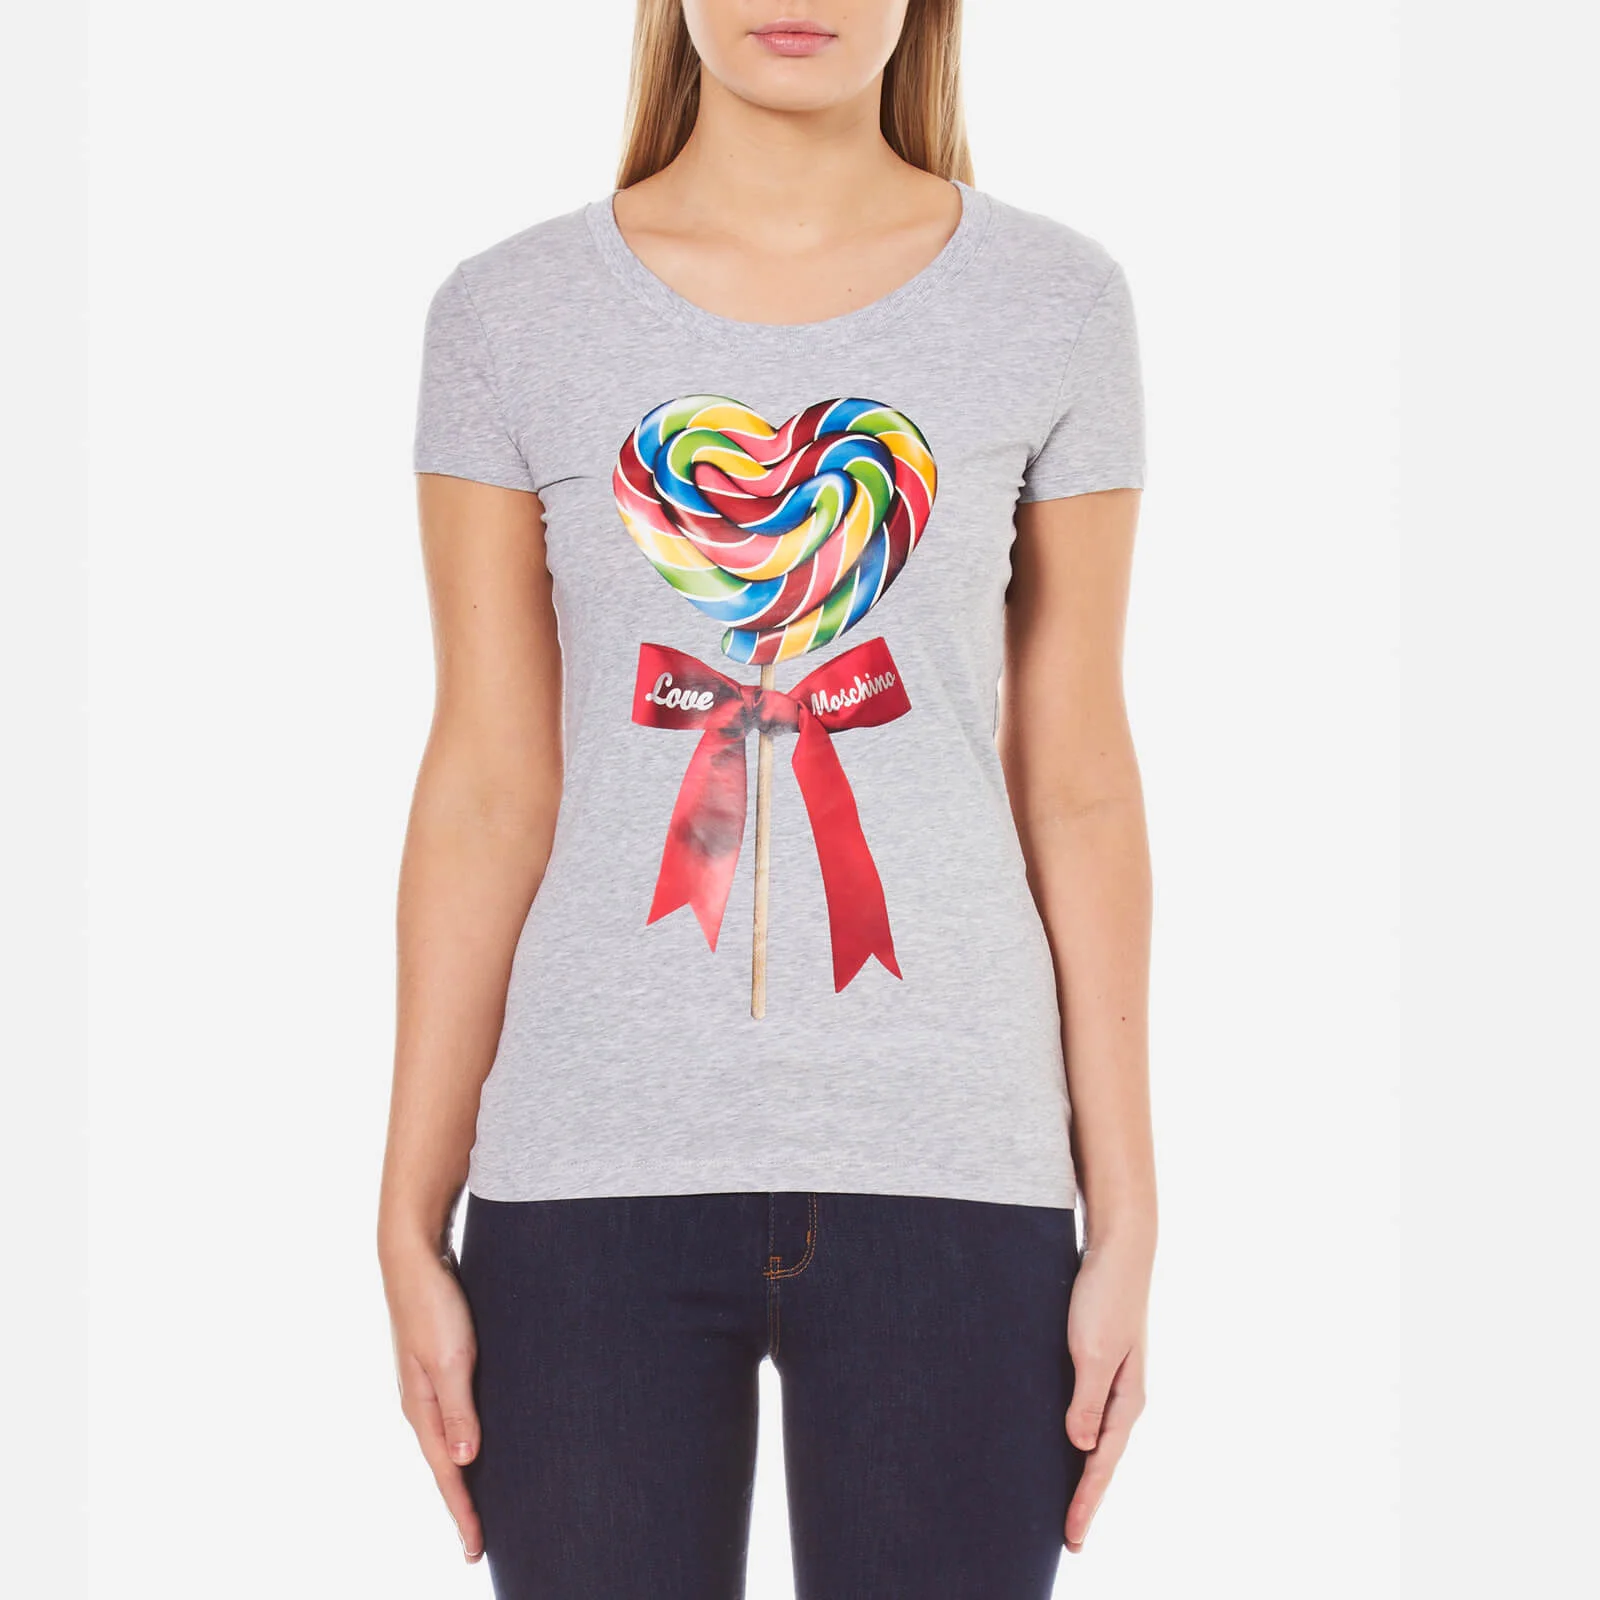 Love Moschino Women's Fitted Candy Bow T-Shirt - Melange Grey Image 1